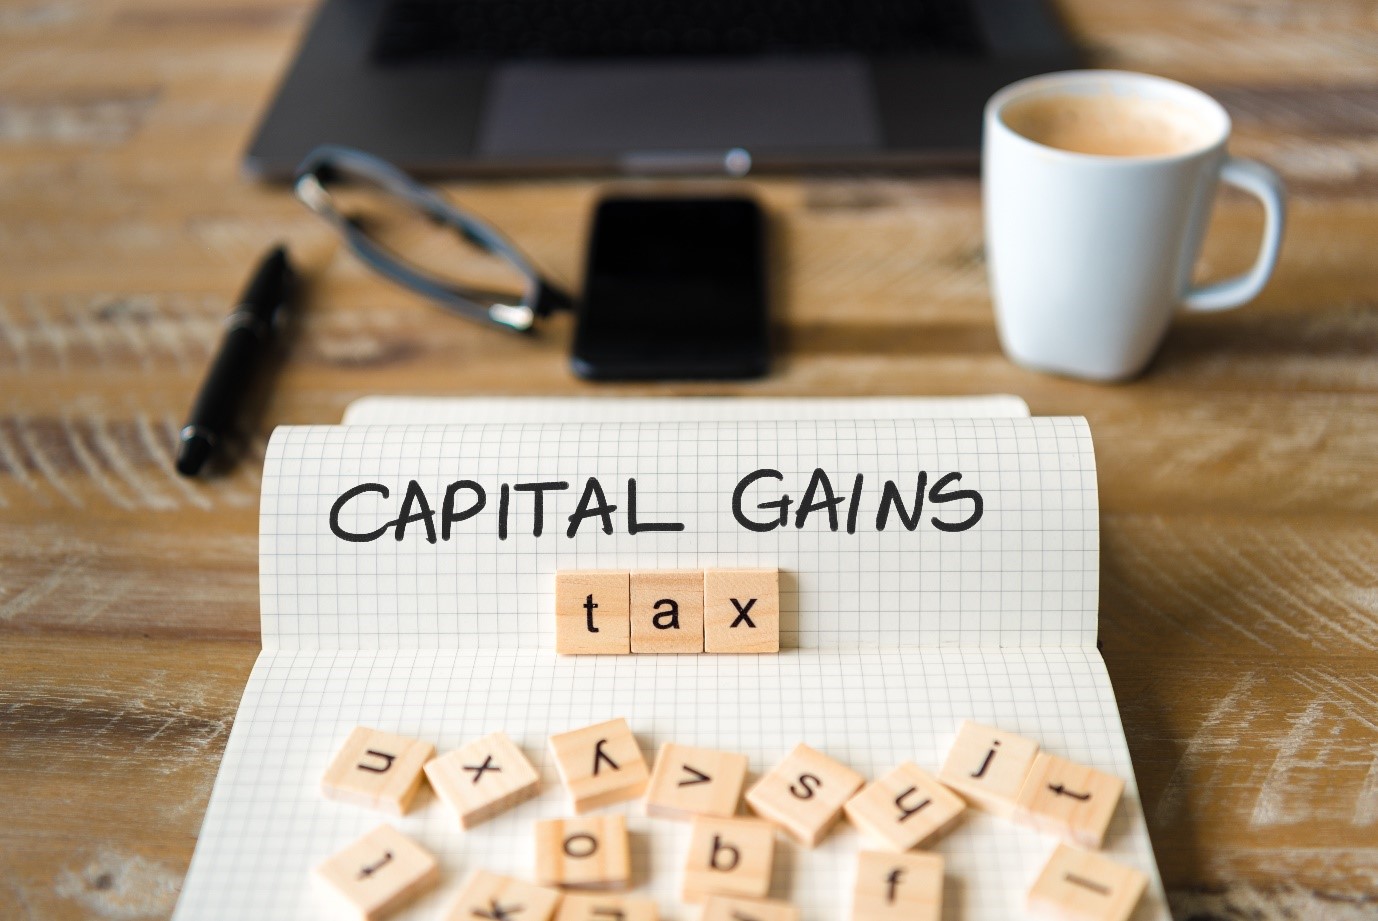 Capital Gains Tax: At what point in time is it triggered?